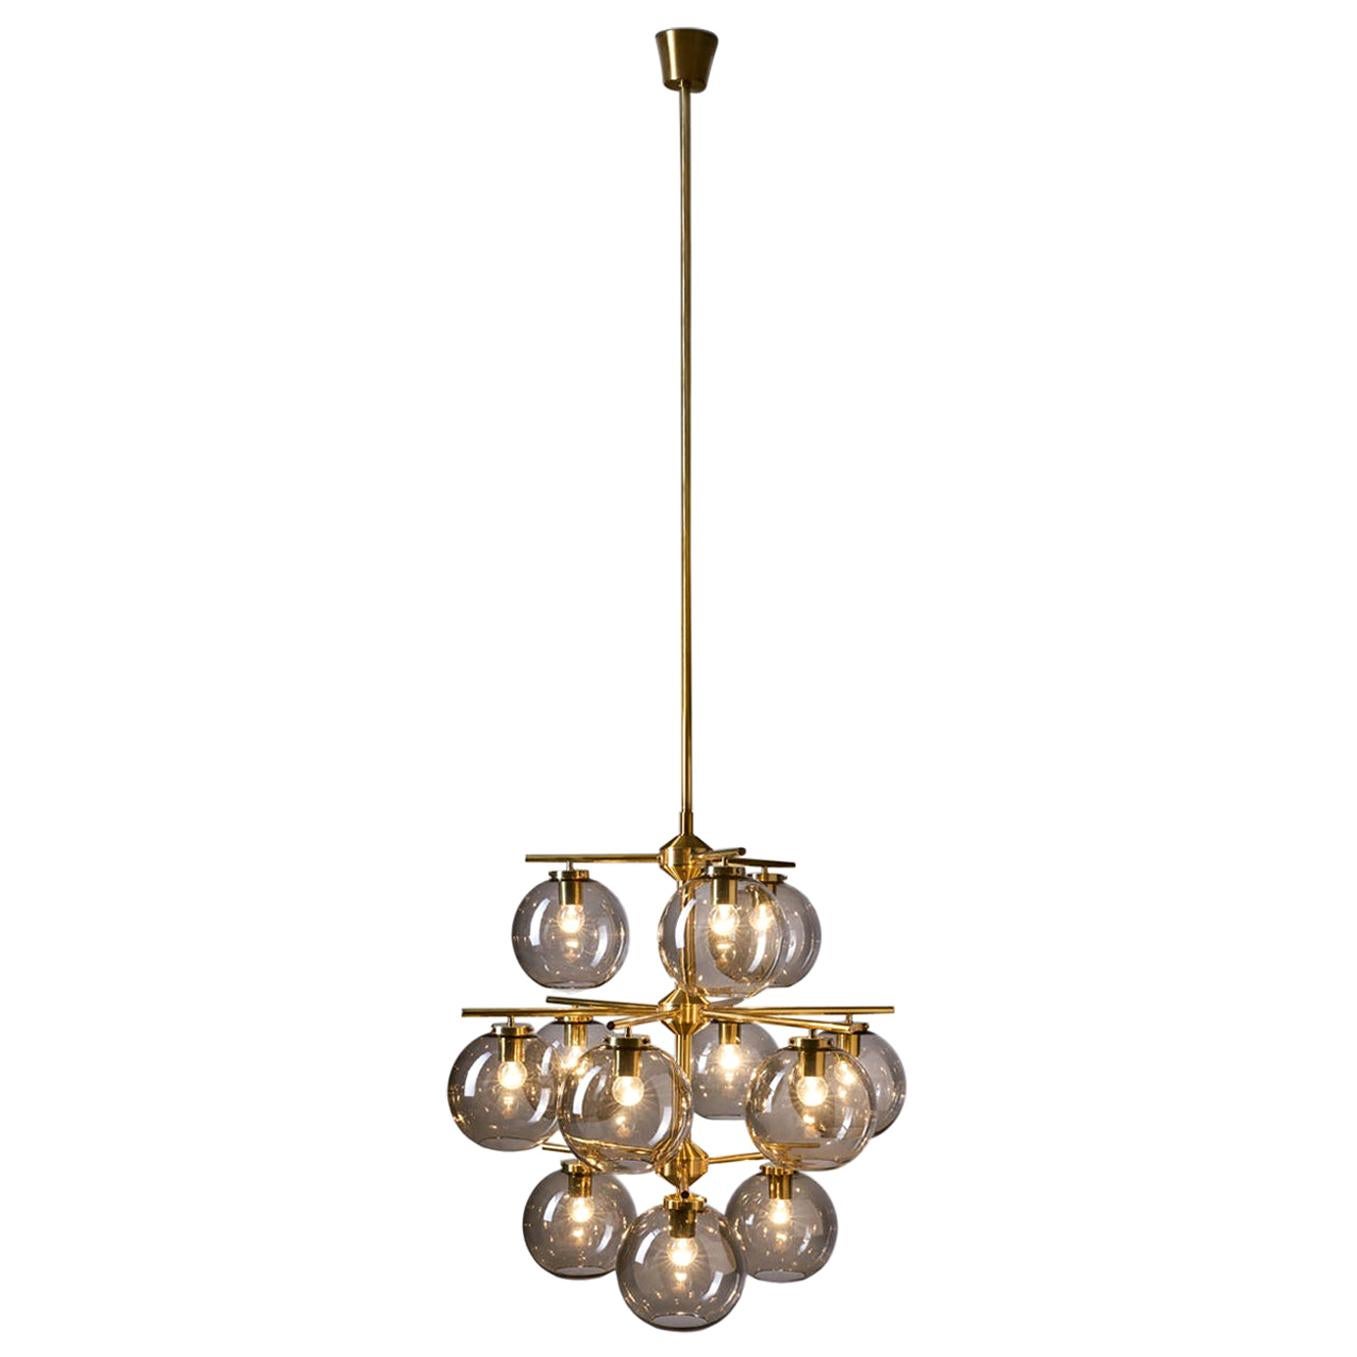 Holger Johansson Chandelier with 12 Smoked Glass Shades for Westal, Sweden 1960s